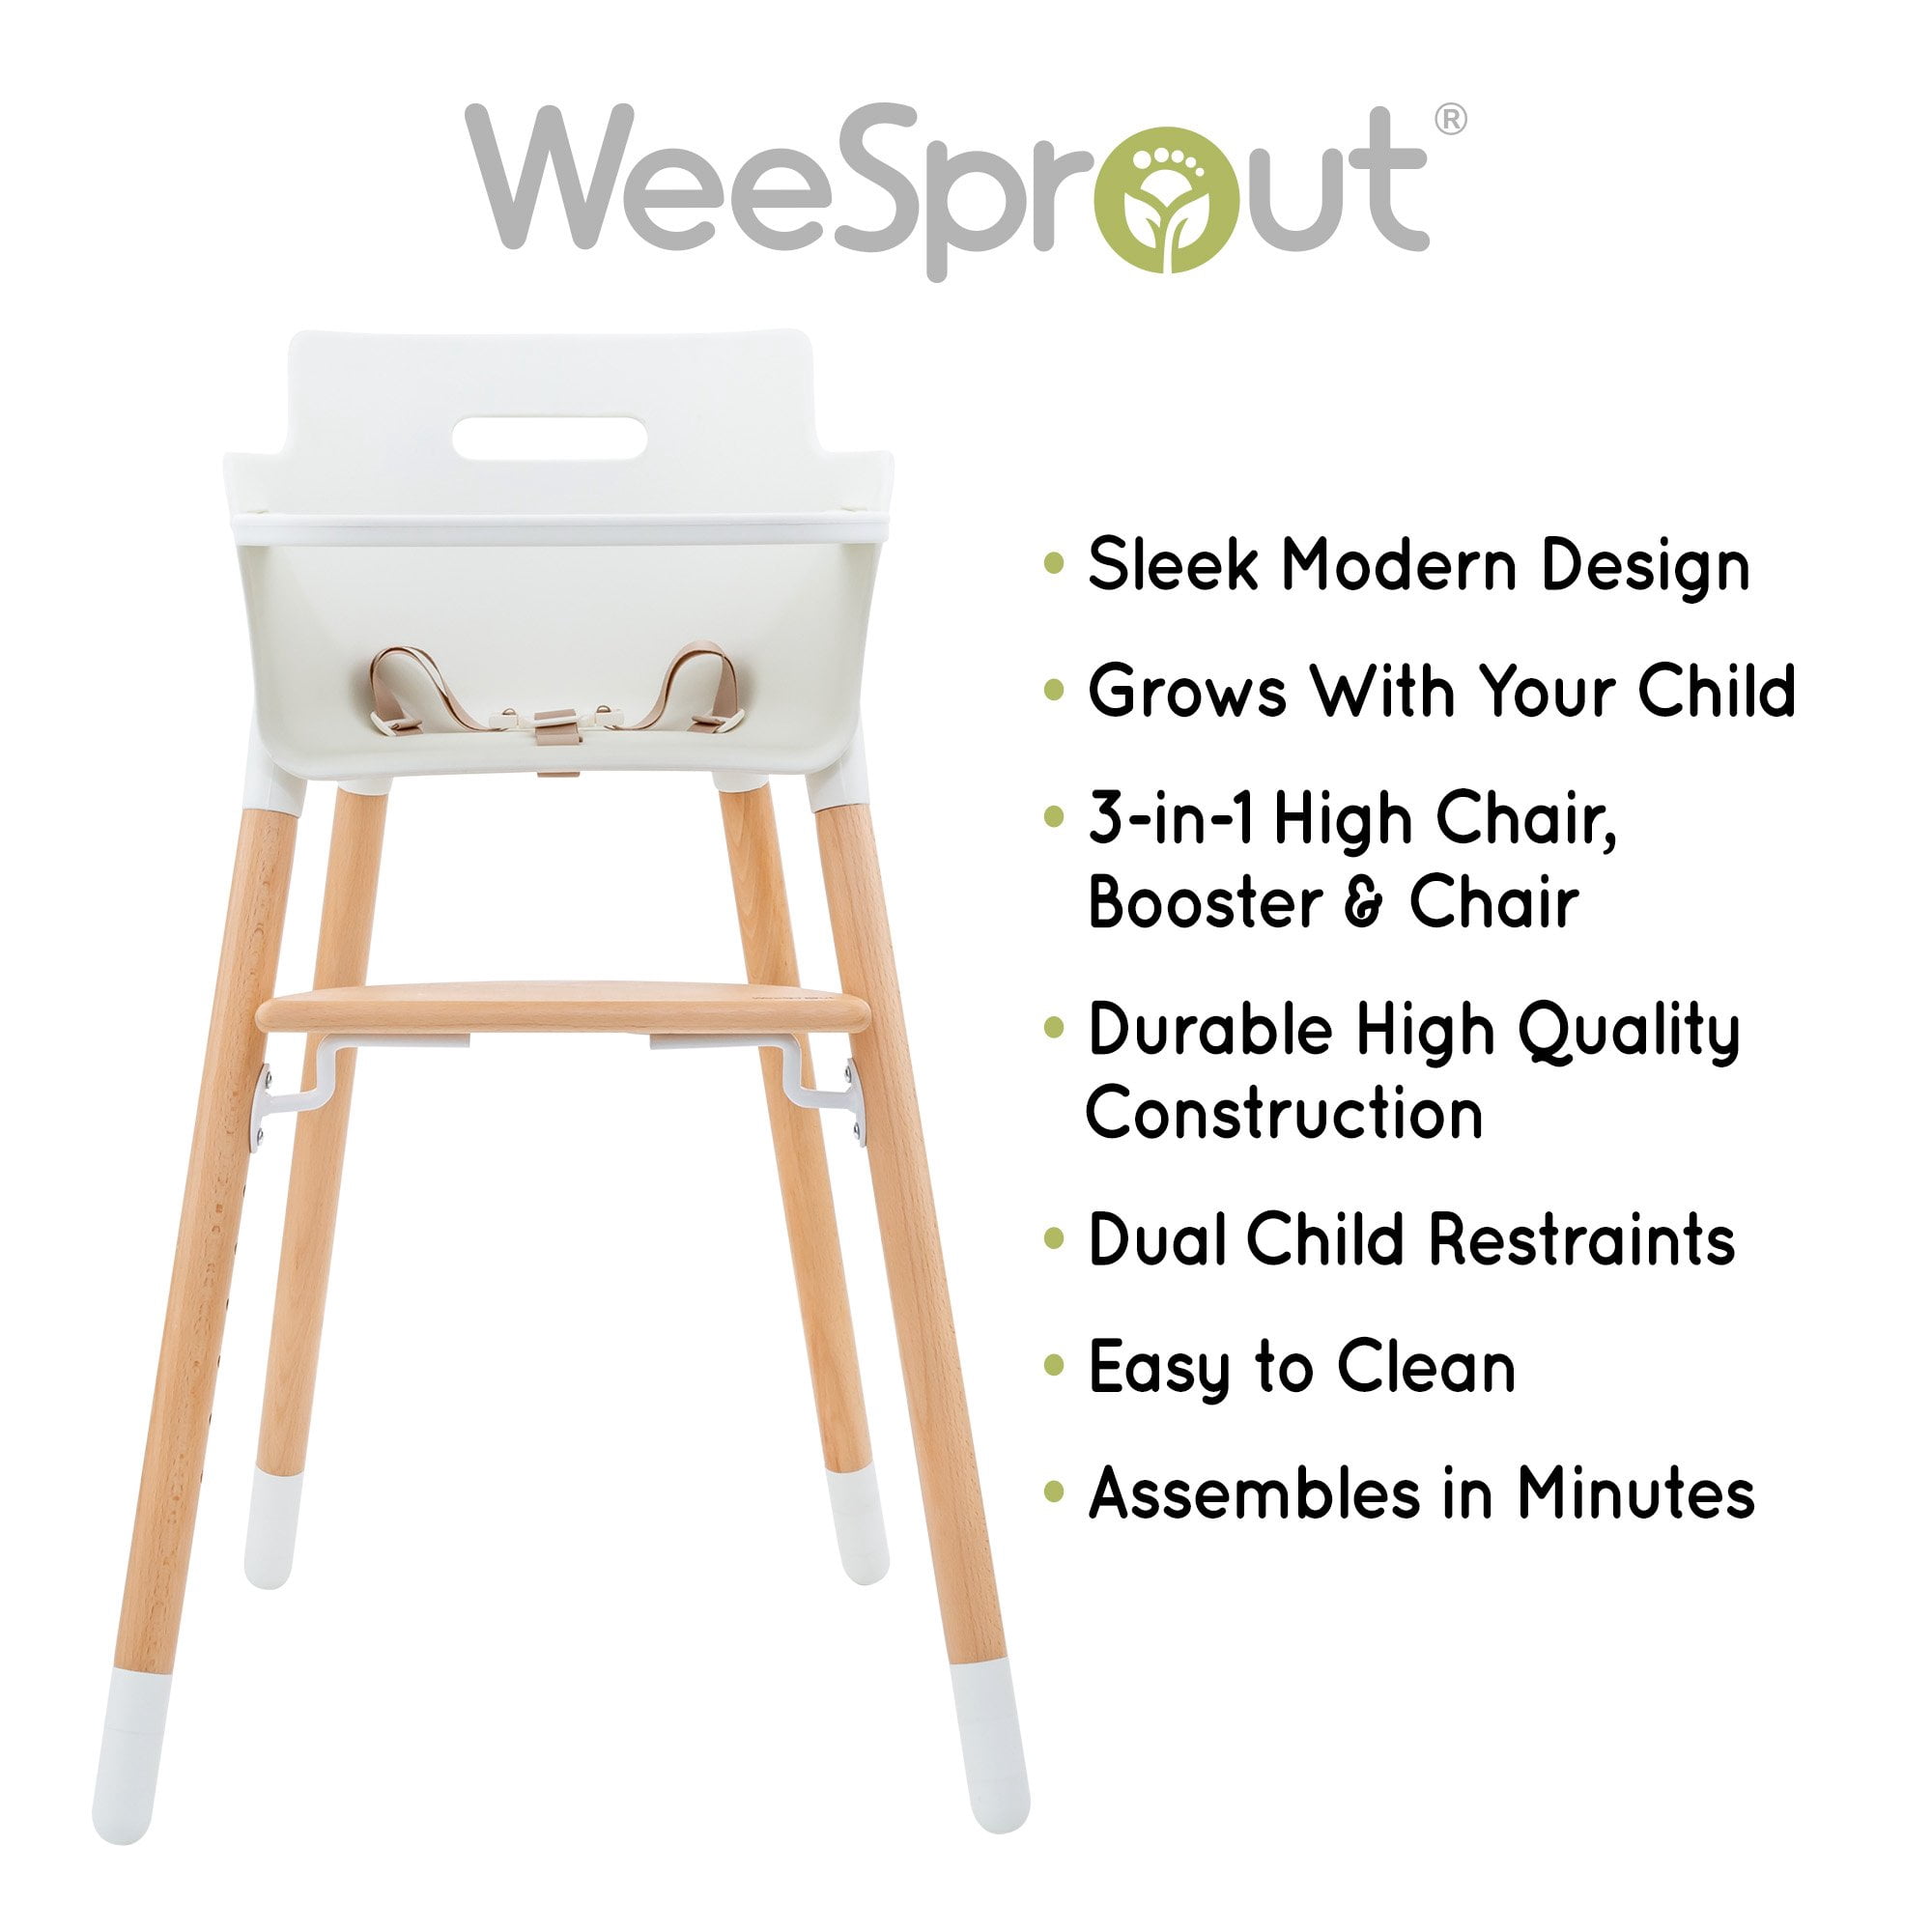 Weesprout Wooden High Chair For Babies Amp Toddlers 3 In 1 High Chair Booster Chair Grows With Your Child Adjustable Footrest Legs Removable Tray Armrest Modern Wood Design E Walmart Com Walmart Com,Tempura Batter Recipe For Chicken